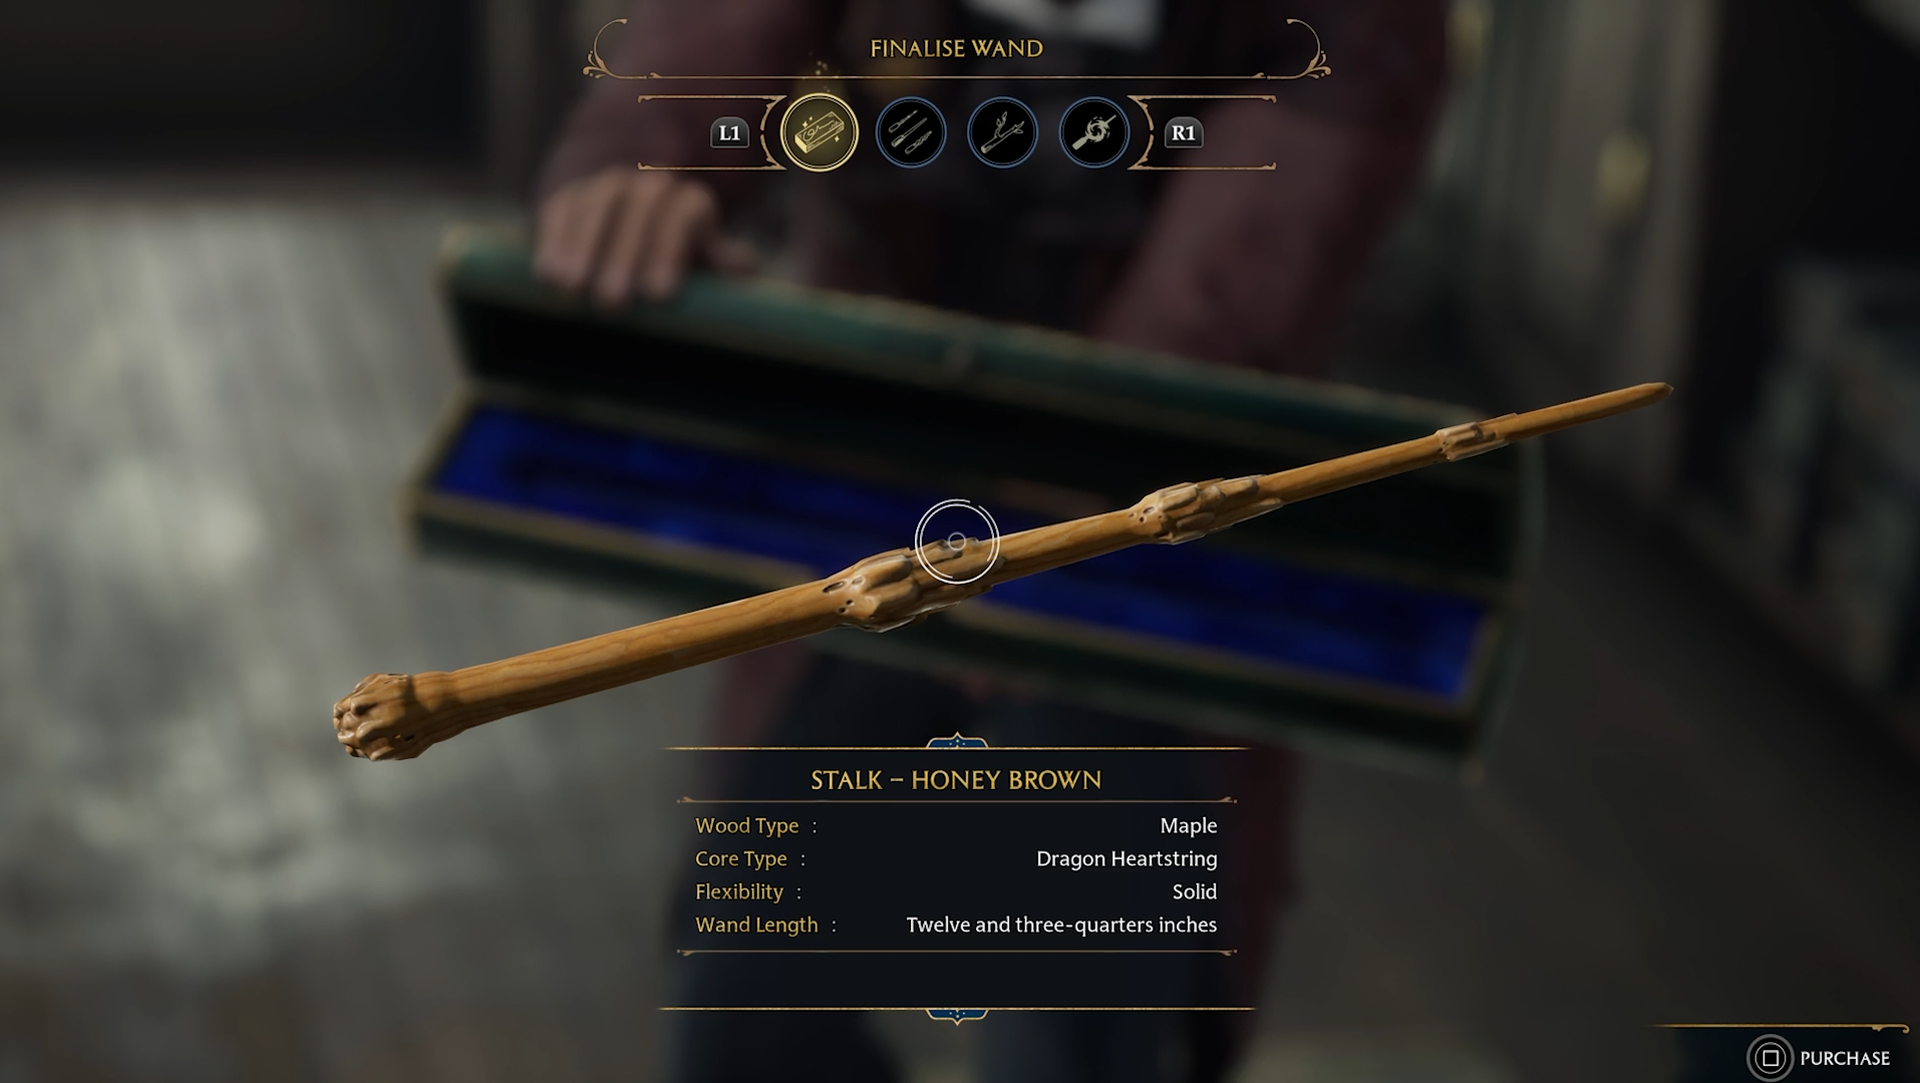 There are many features you can choose from while customizing your wand, including Dragon Heartstring vs Phoenix Feather core option